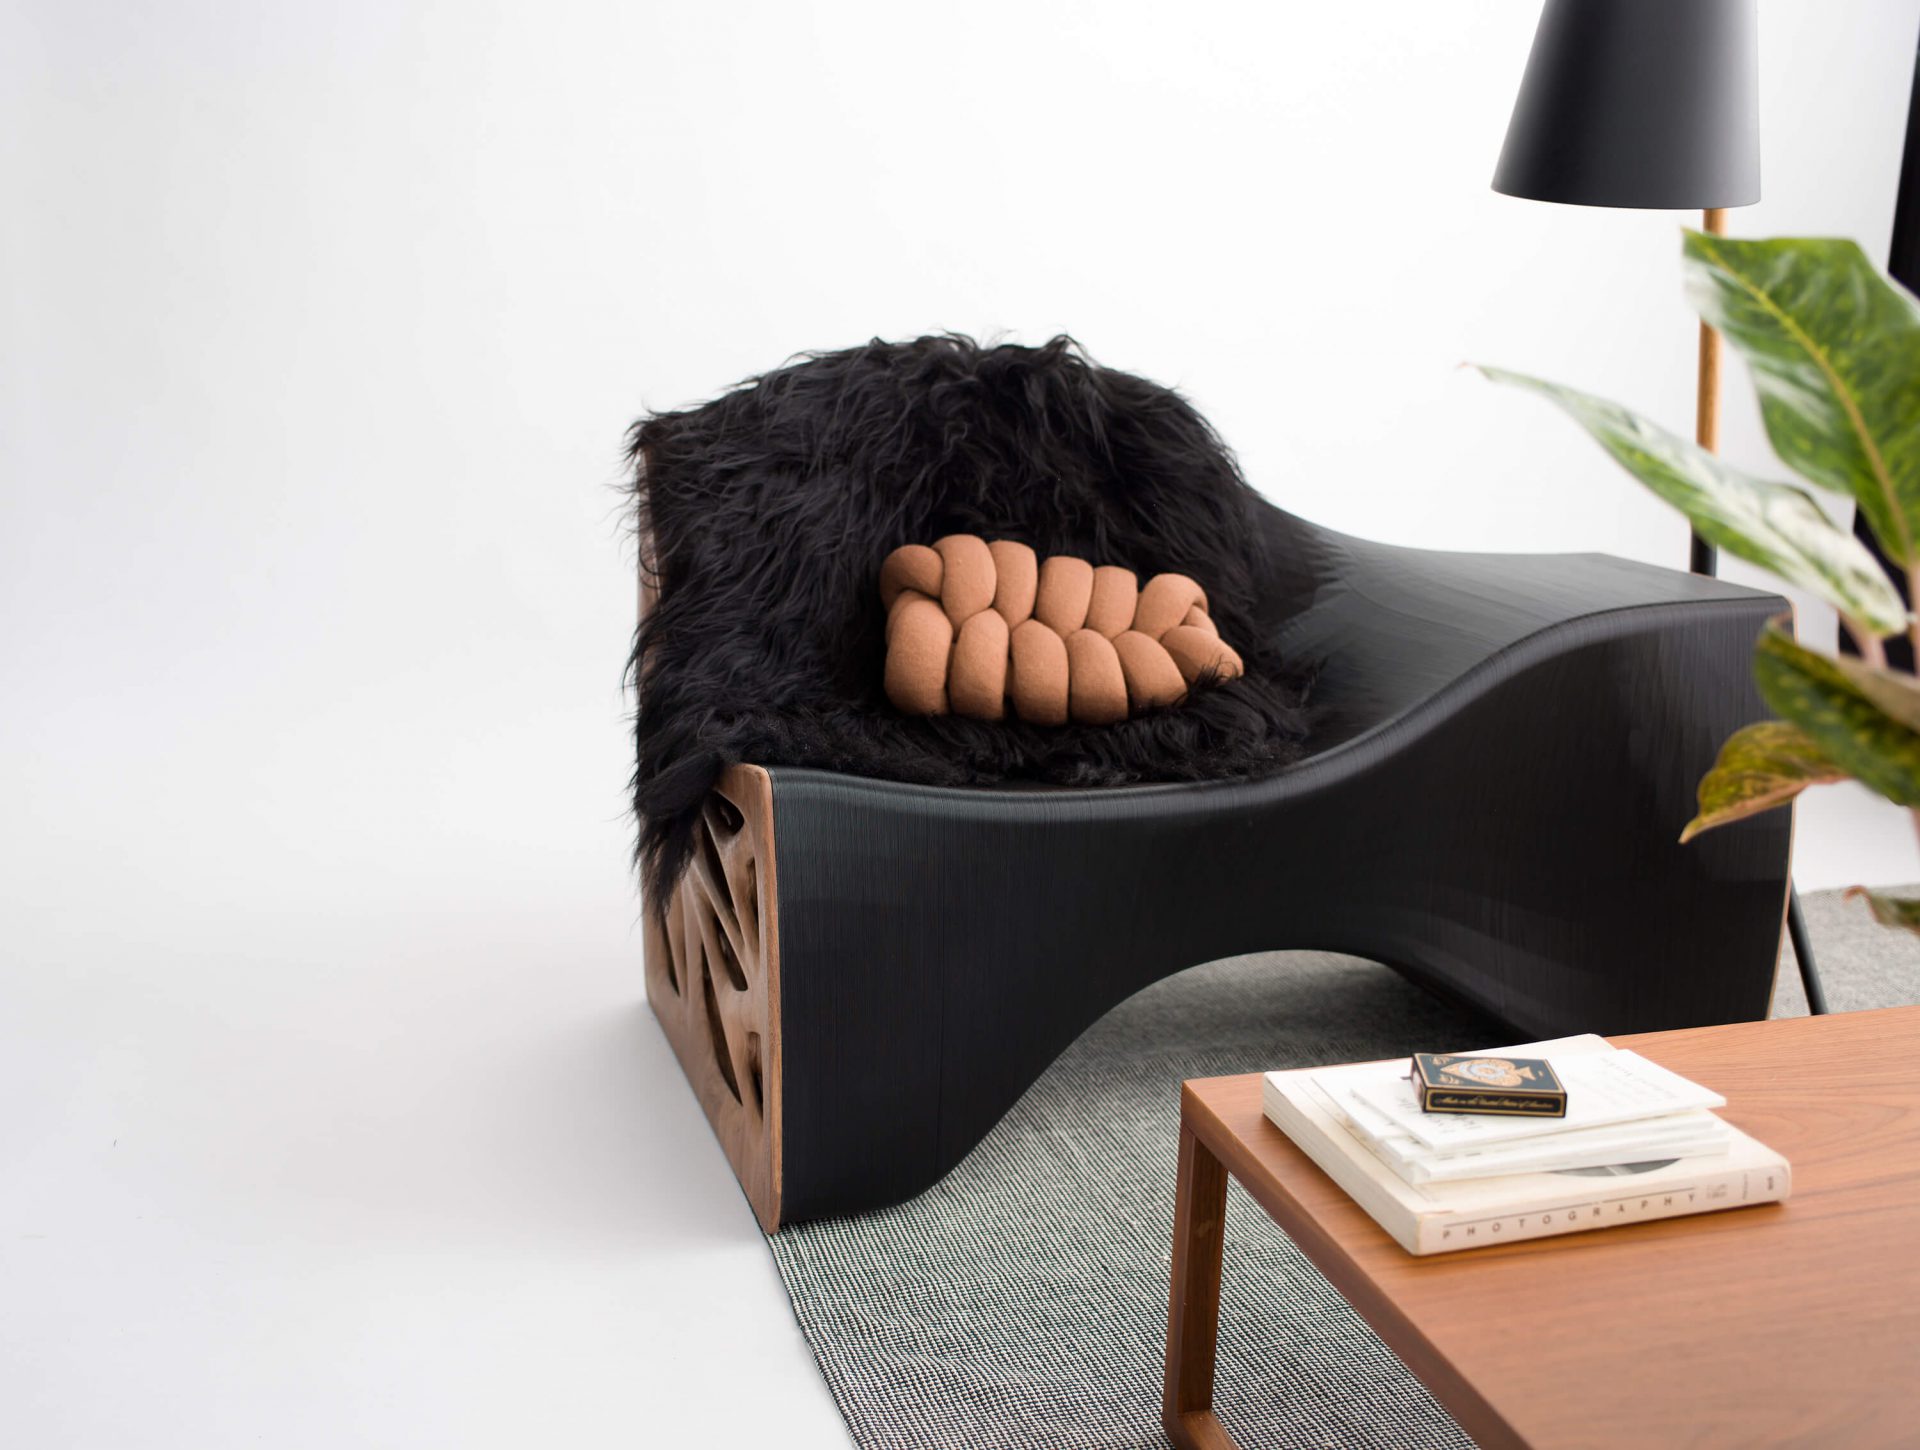 Model No - Avens Chaise Lounge